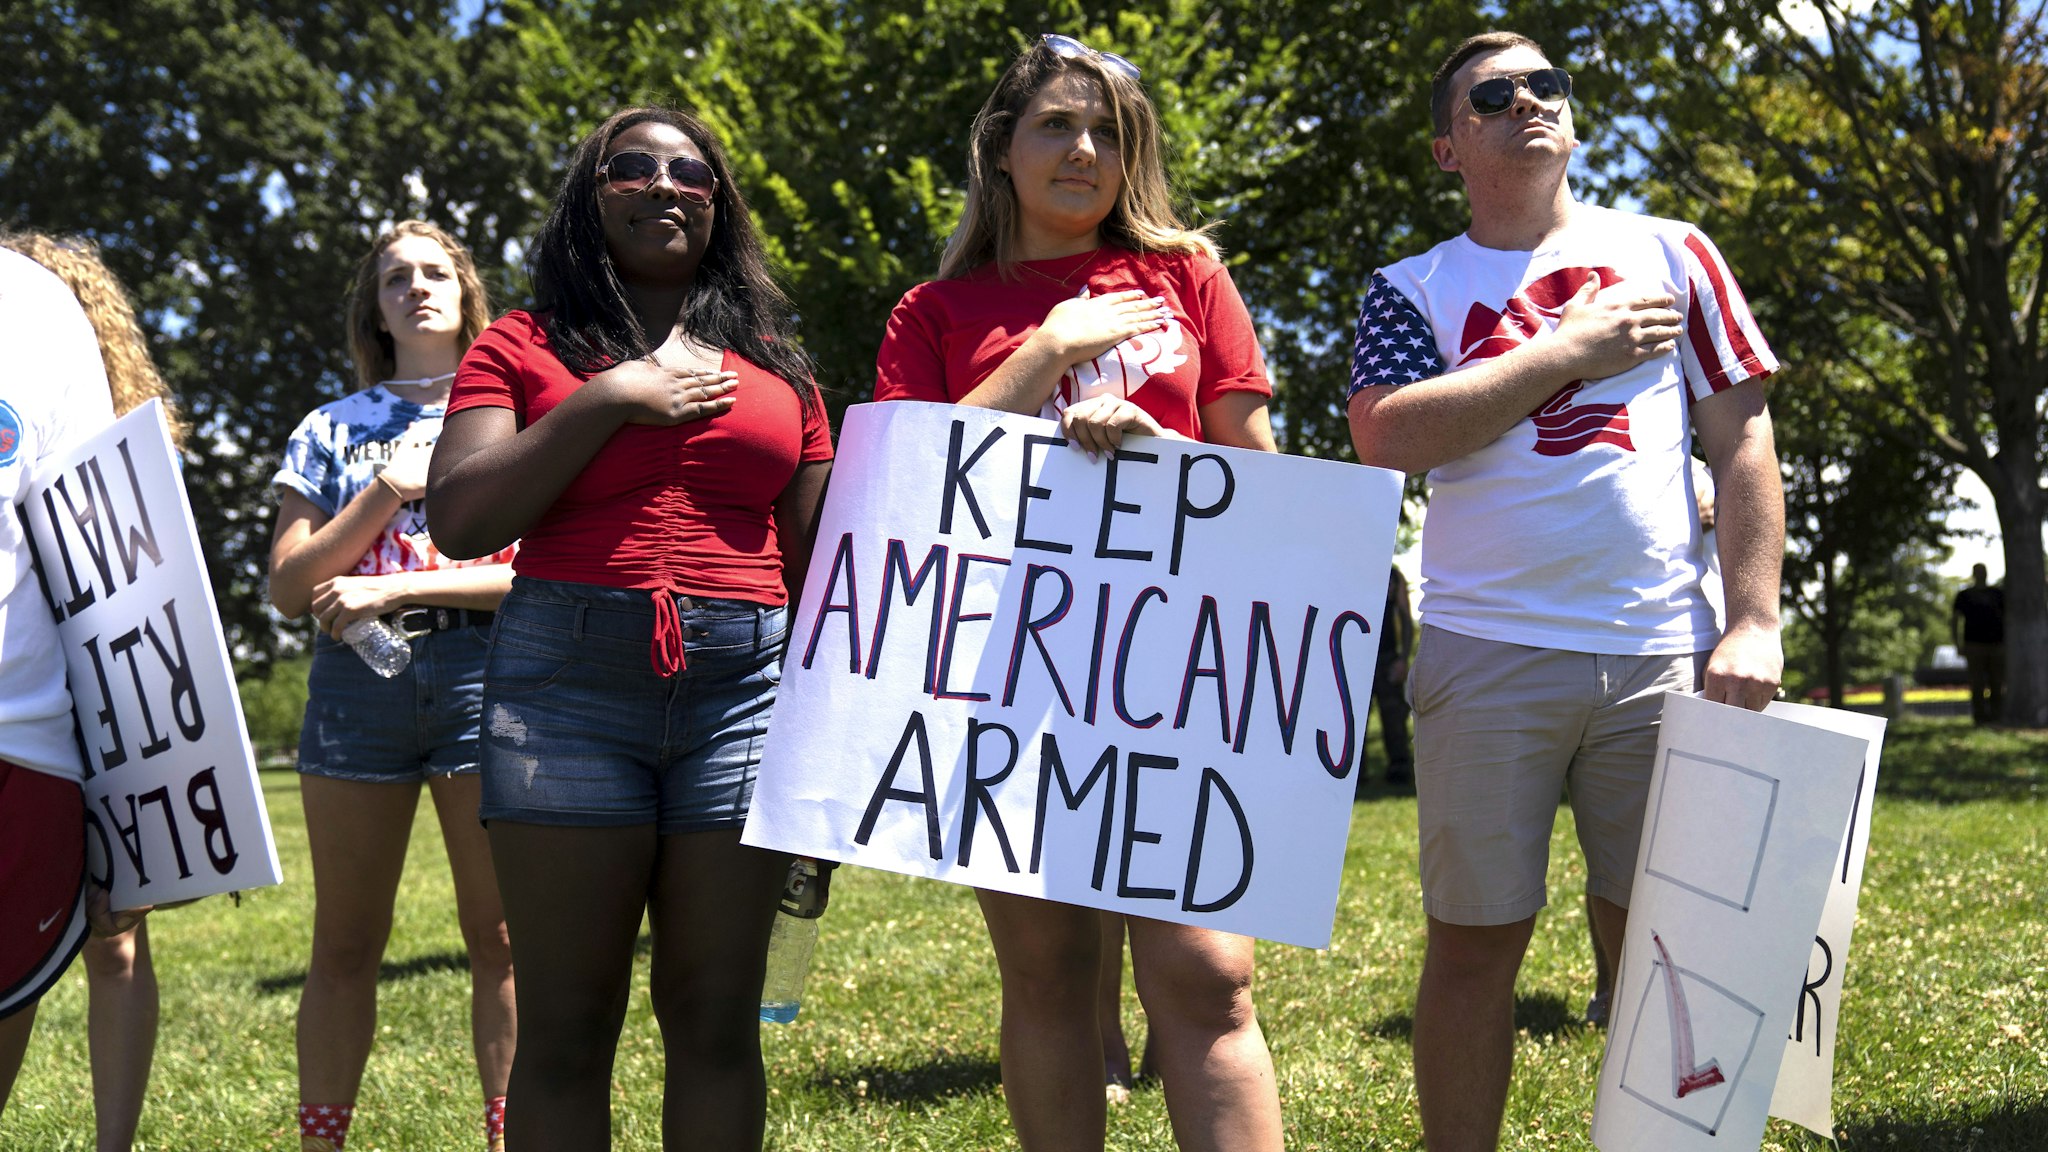 People sing the national anthem during the March For Our Rights rally, promoting Second Amendment Rights and the safety of students in schools outside the U.S. Capitol on July 7, 2018 in Washington, DC. Rallies are being held across the country as a reaction to the student-led gun control movement started after the Parkland school shooting.